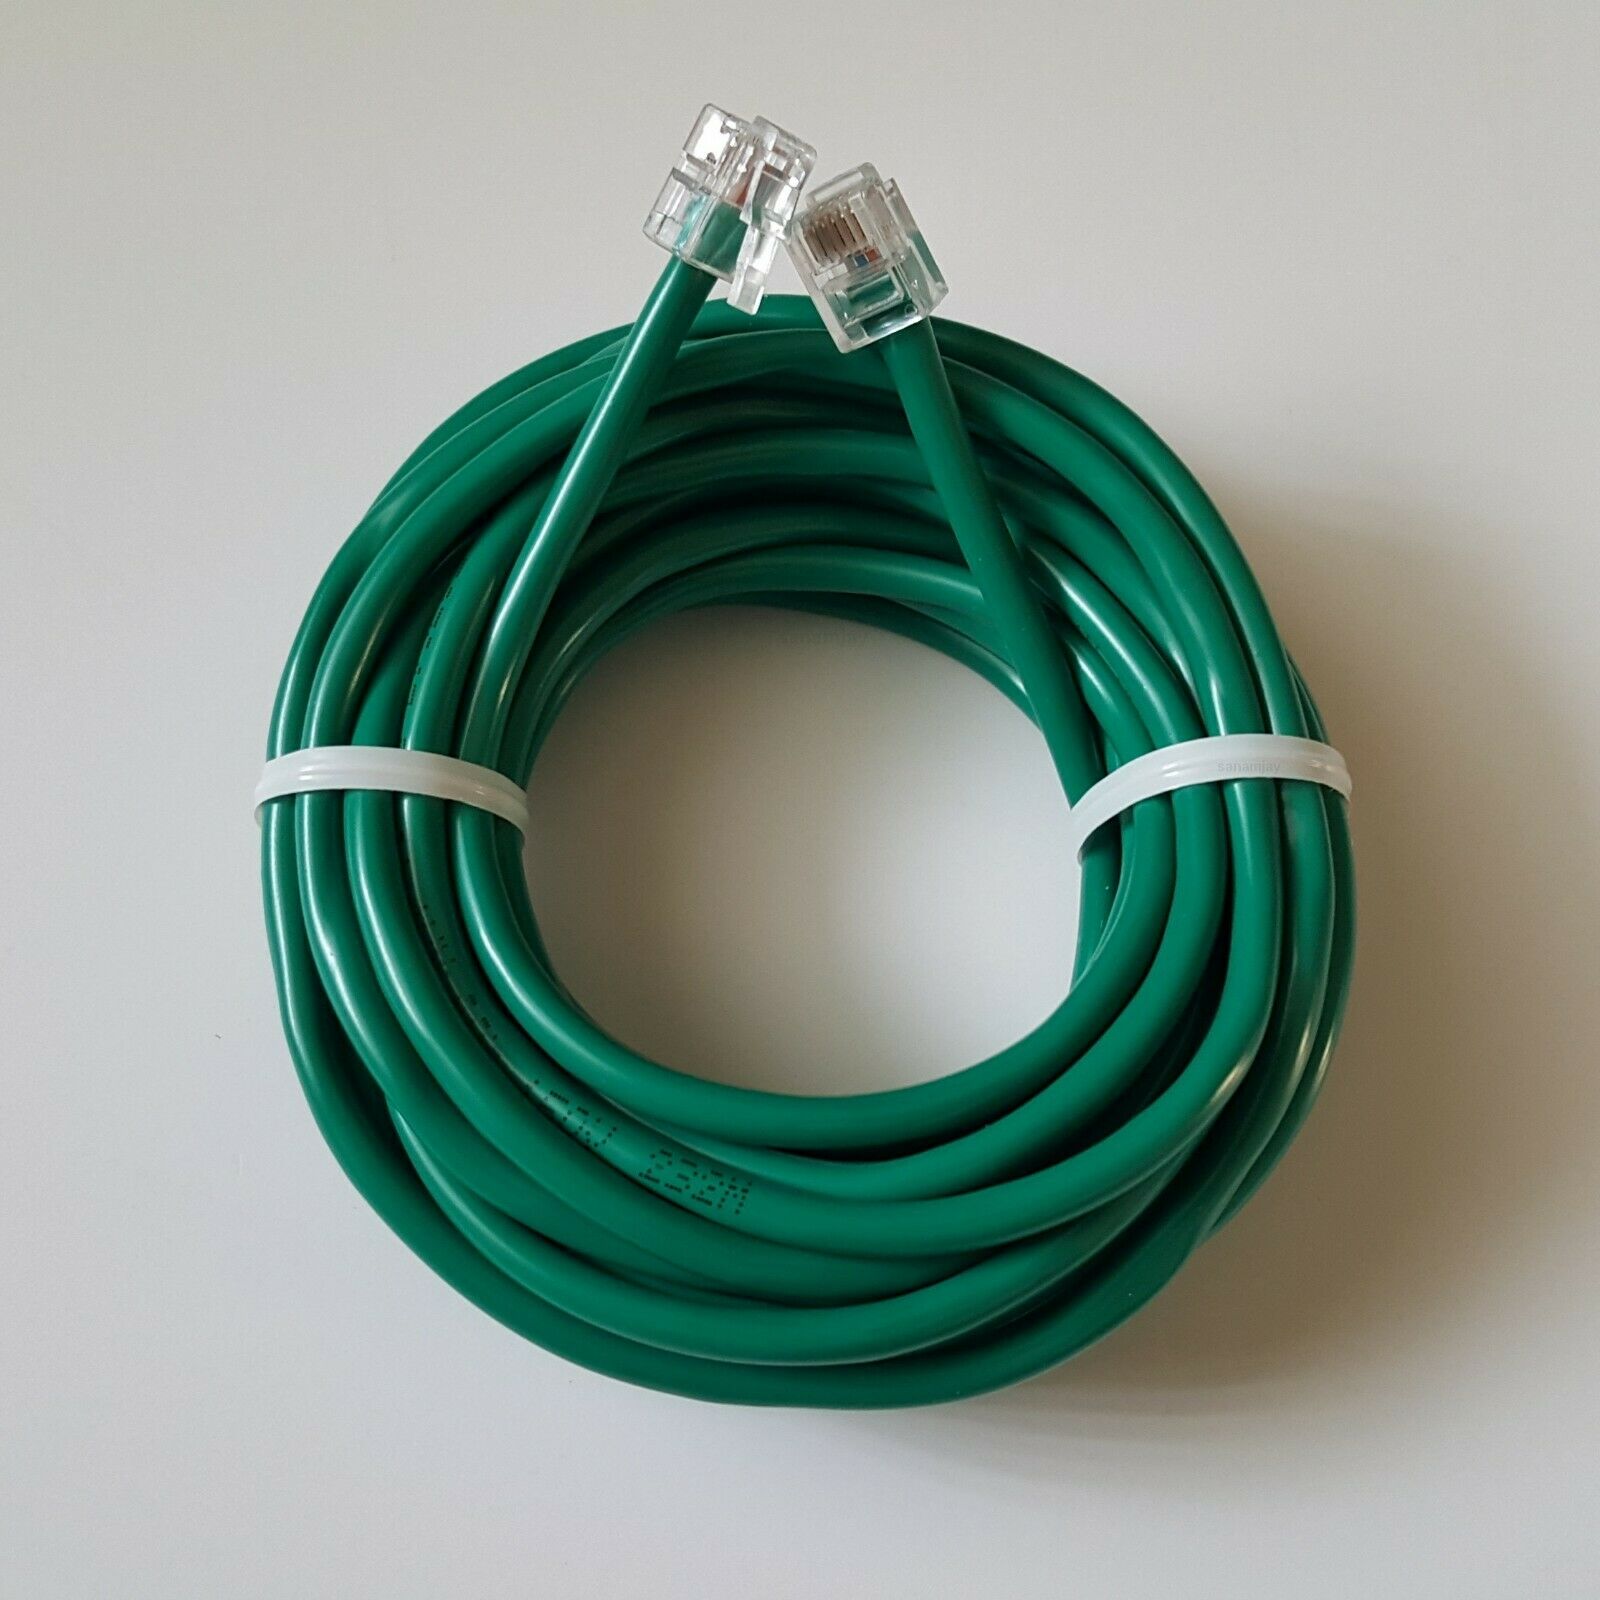 Rj11 Rj12 Cat5e Green Dsl Telephone Data Cable For Centurylink, At$t, Frontier .